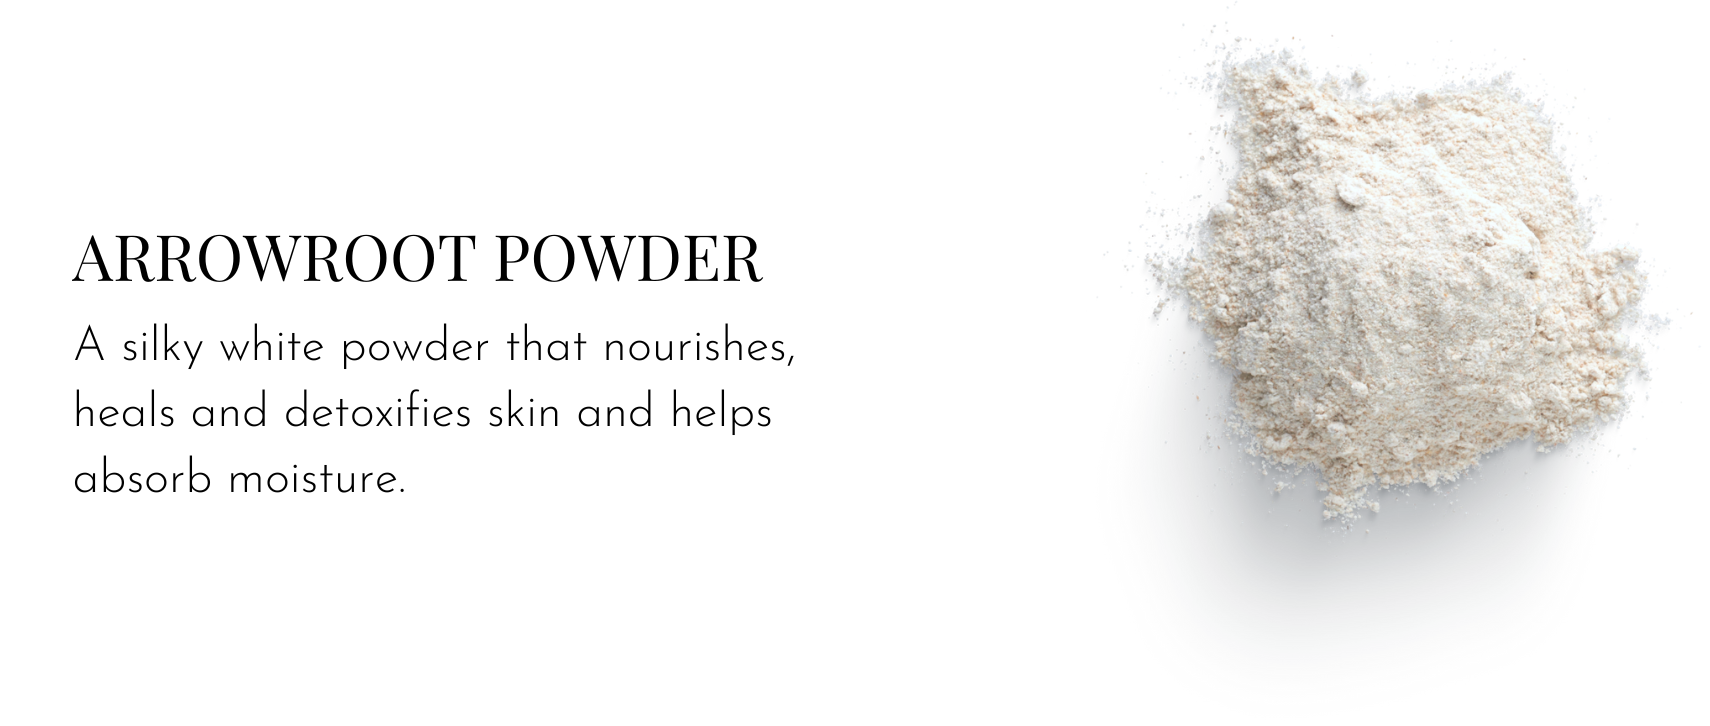 Arrowroot Powder – A silky white powder that nourishes, heals and detoxifies skin and helps absorb moisture.